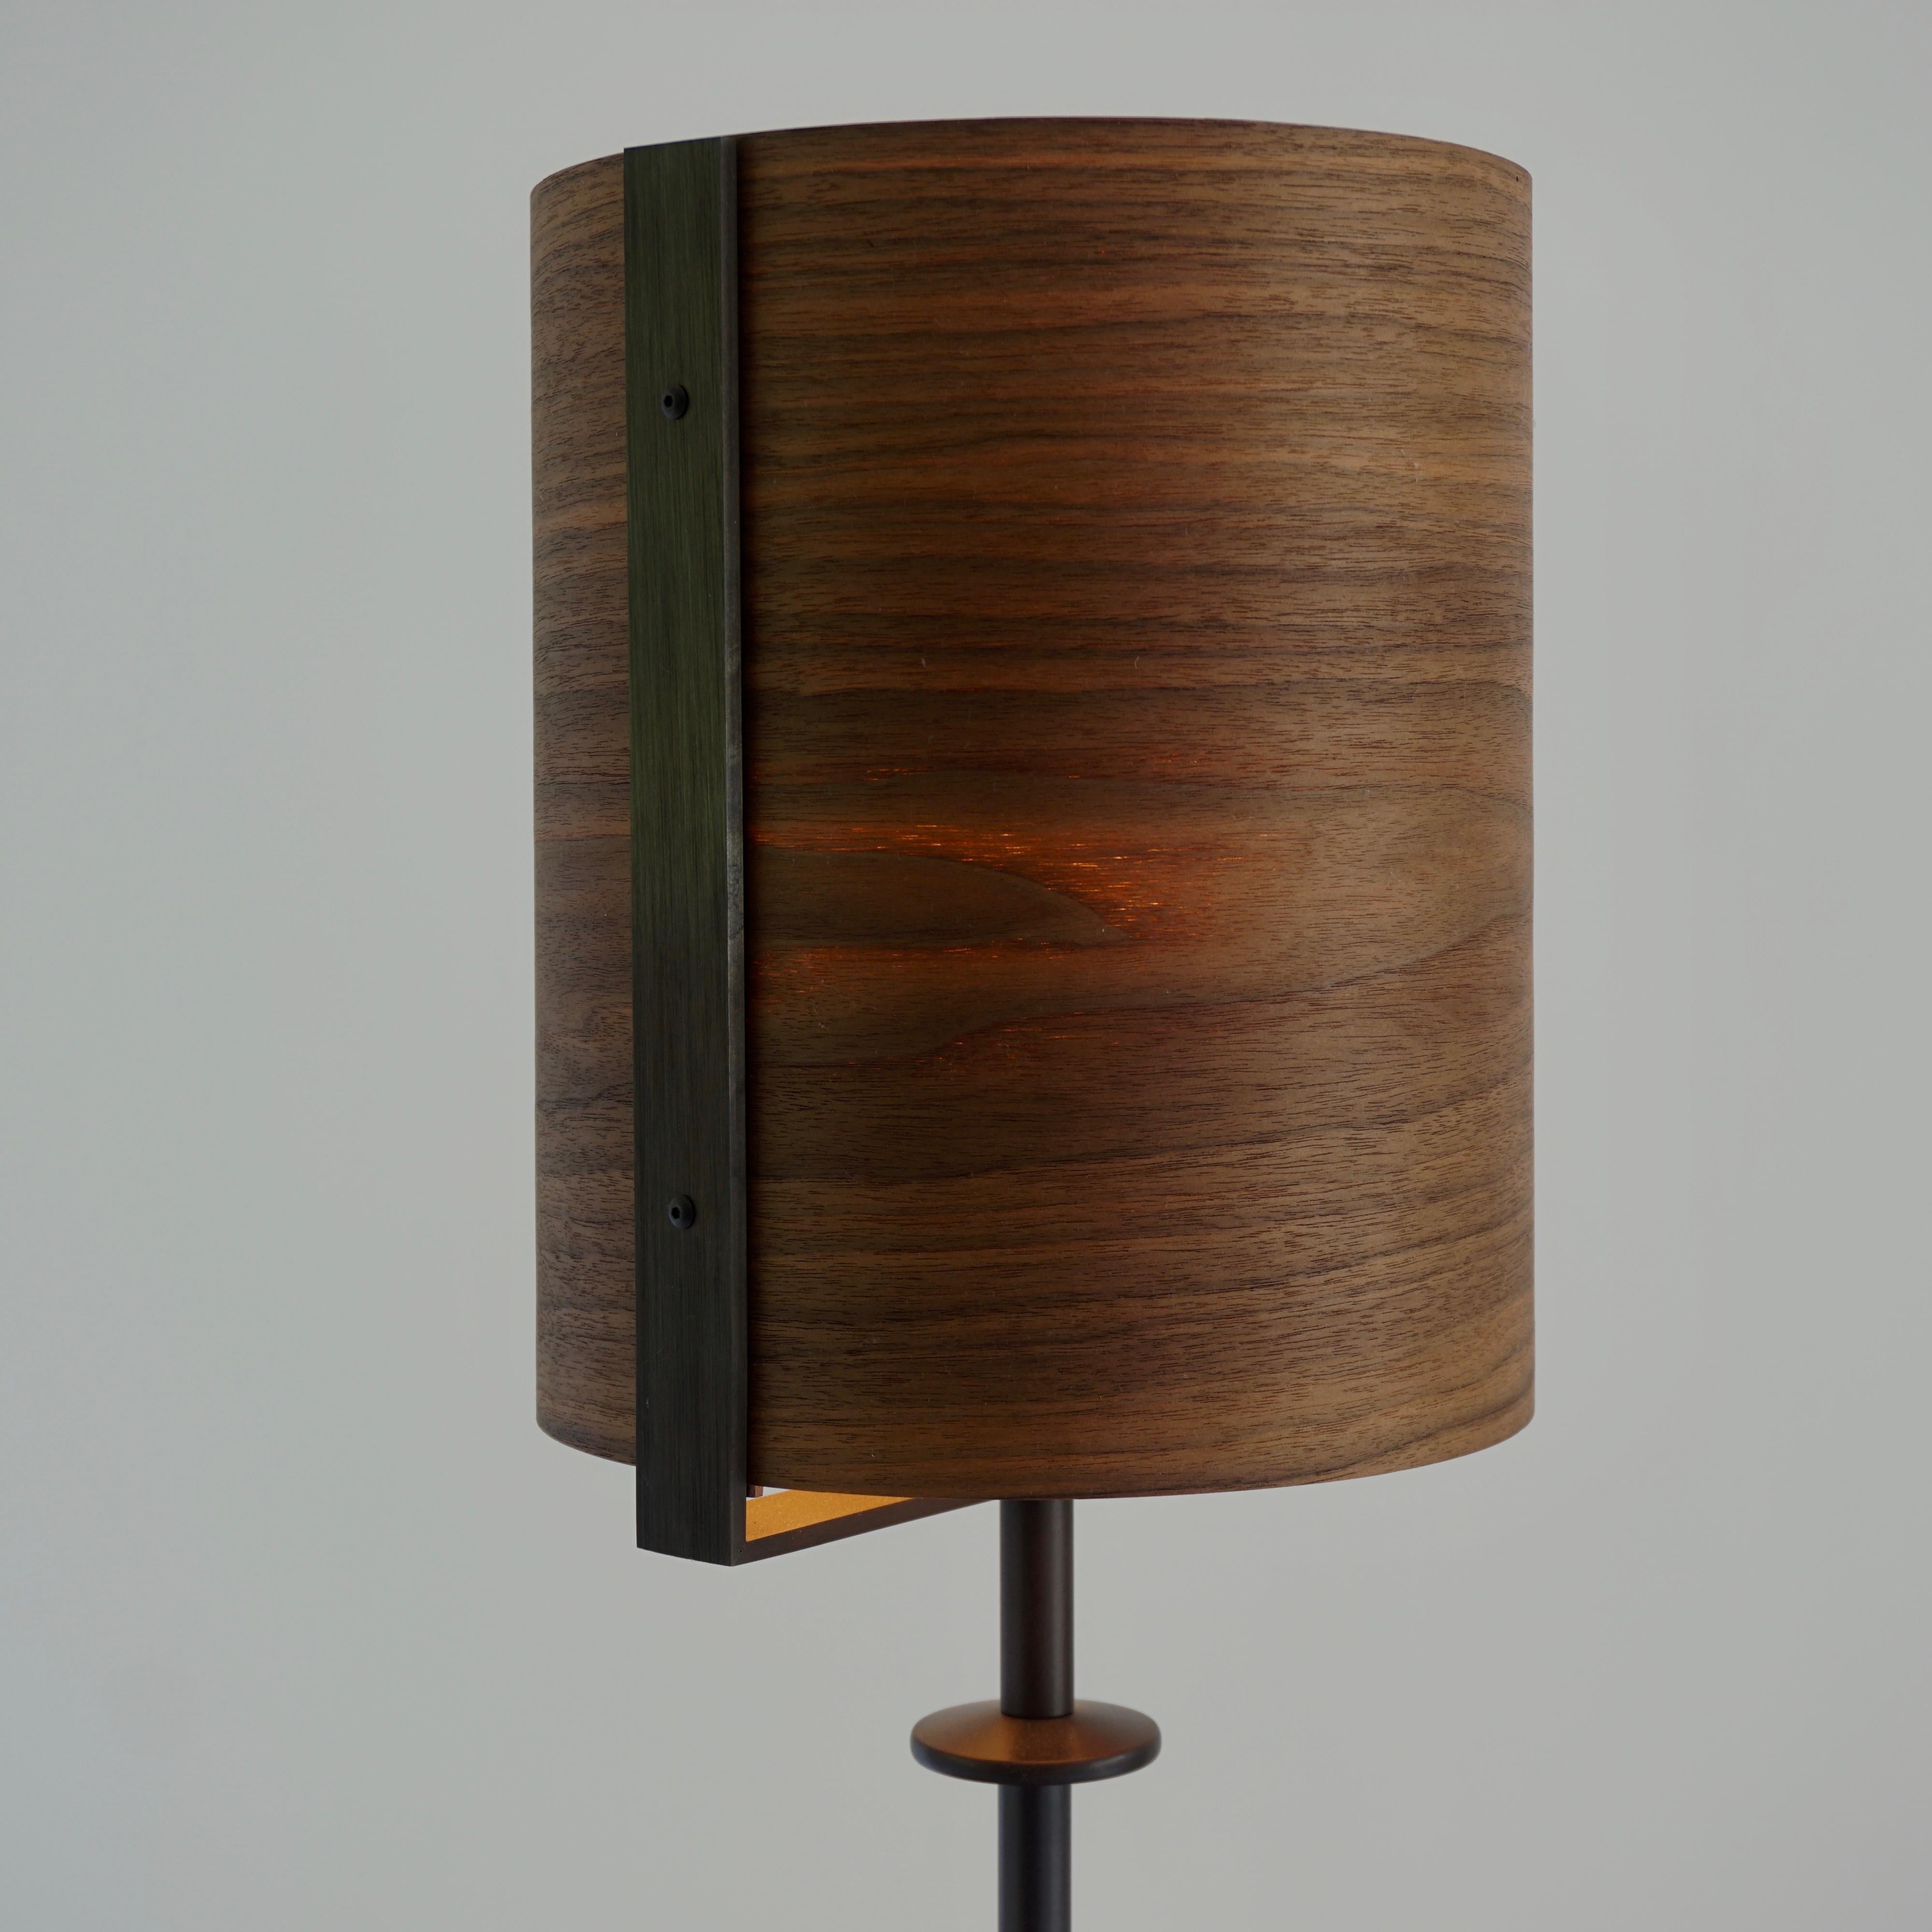 Walnut Veneer Table Lamp #4 with Blackened Bronze Frame In New Condition For Sale In Bangall, NY